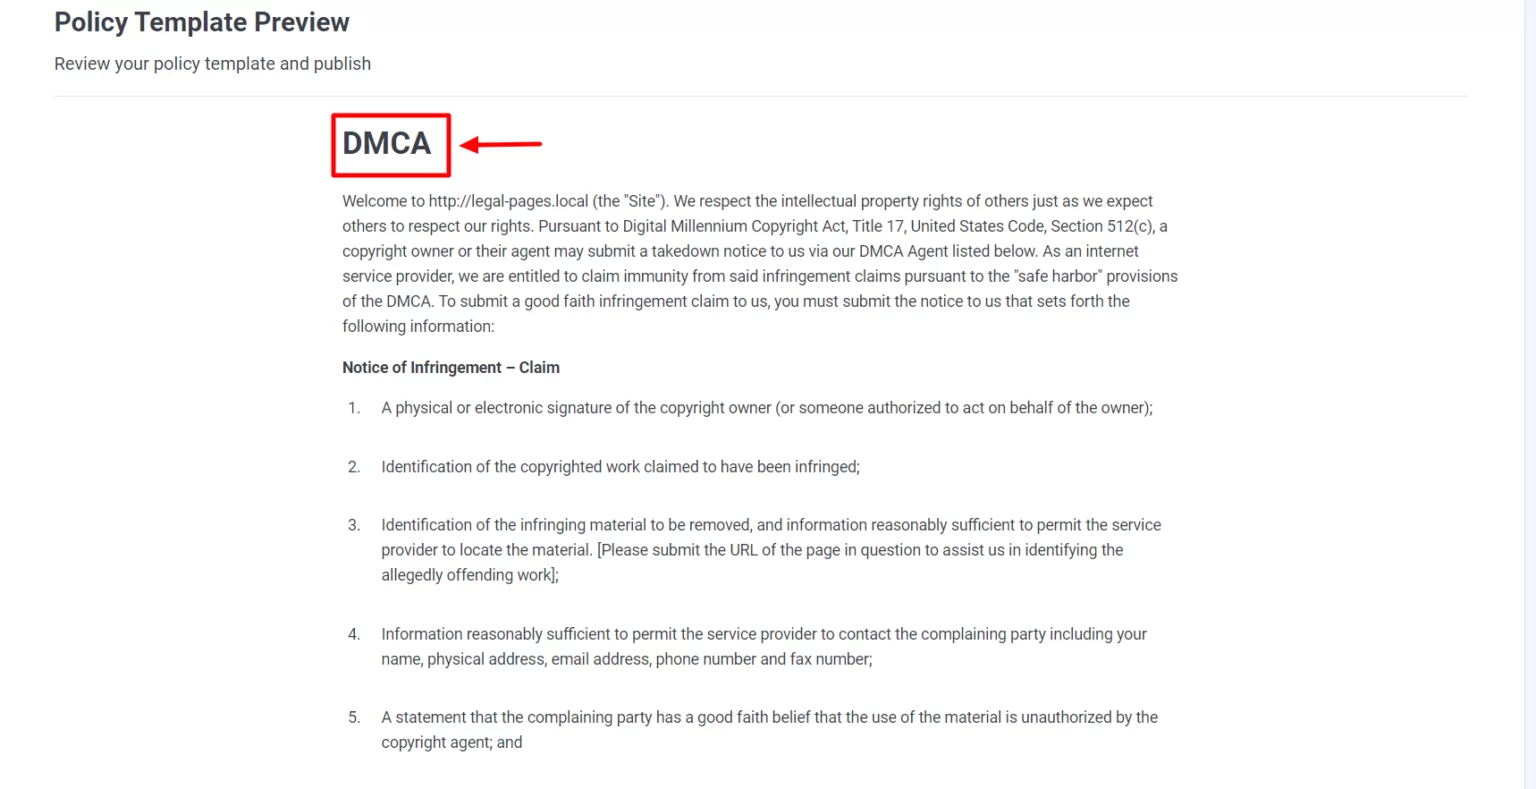 DMCA notice template is ready